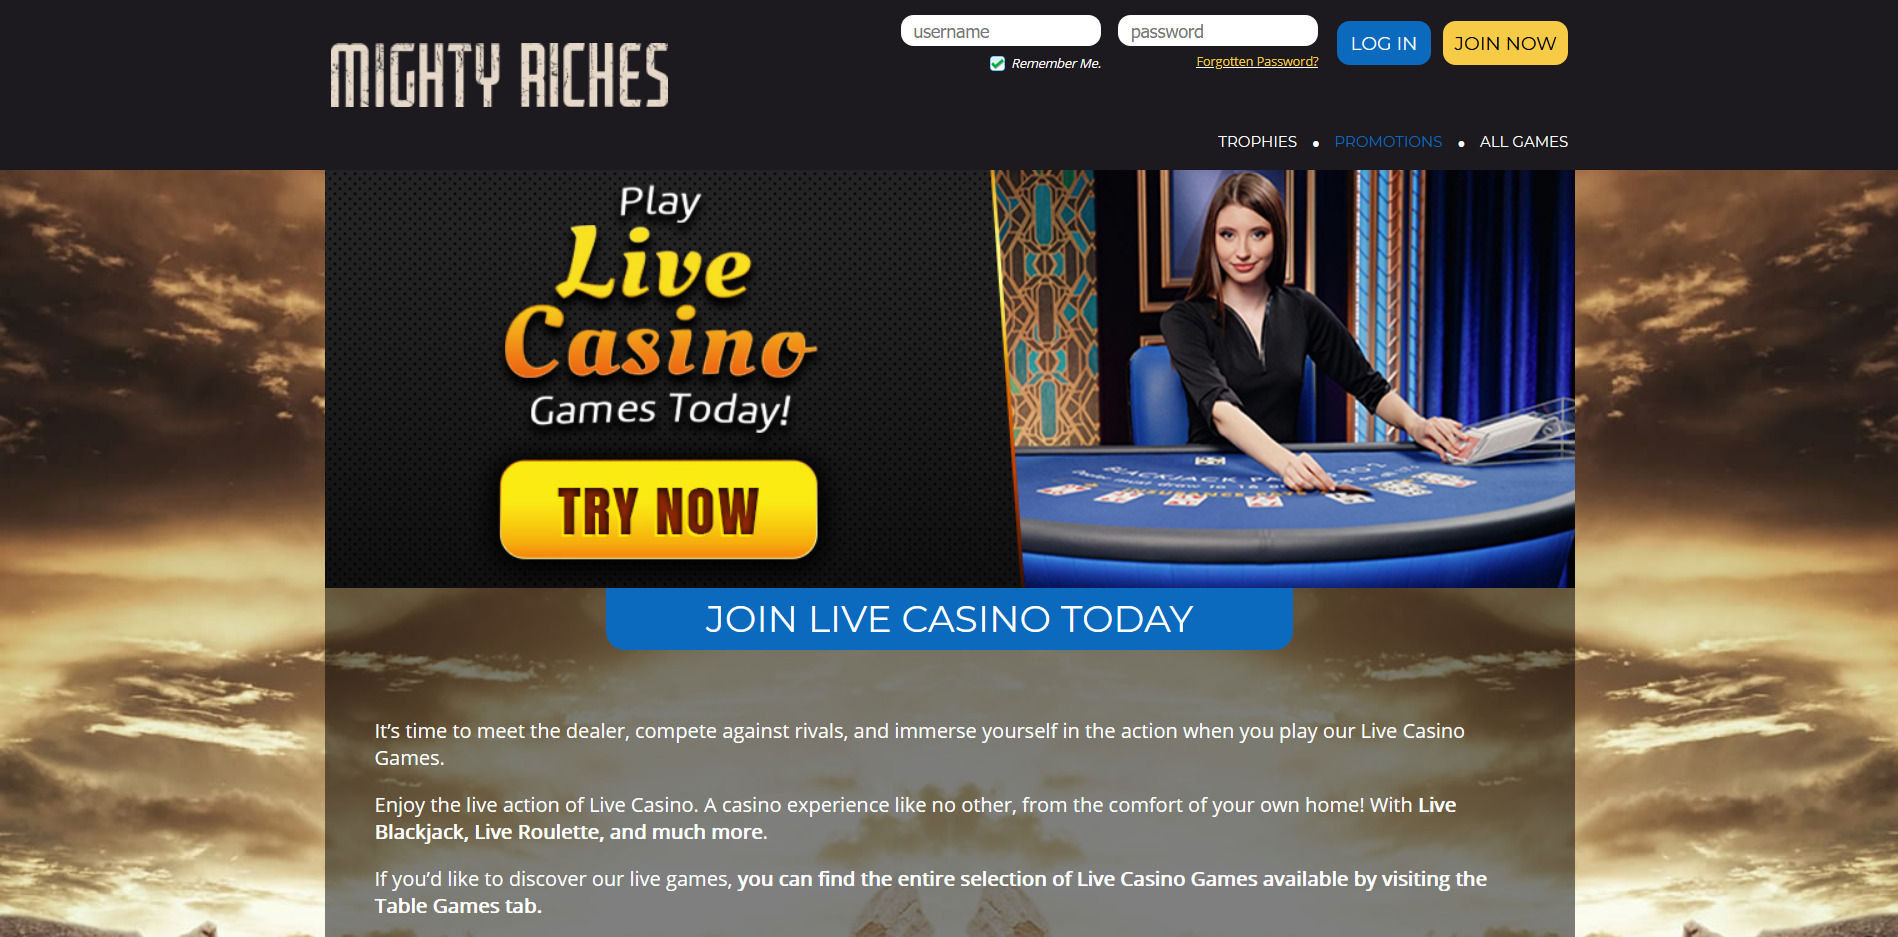 Mighty Riches Casino Live Dealer Games